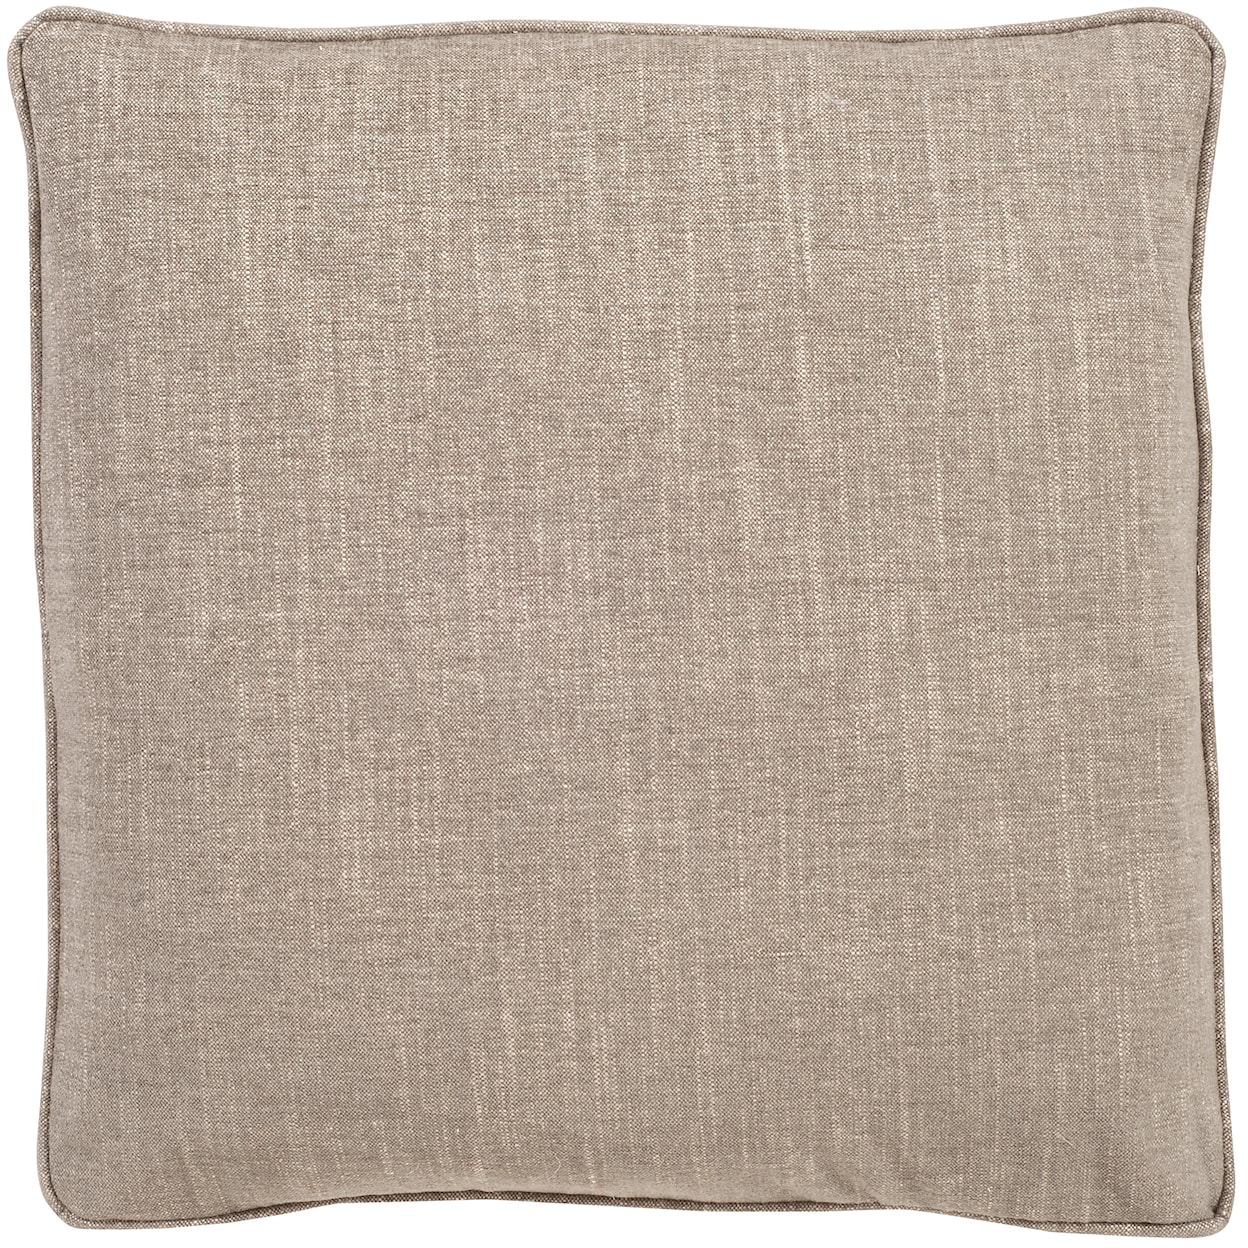 Bradington Young Accessories 26-Inch Pillow